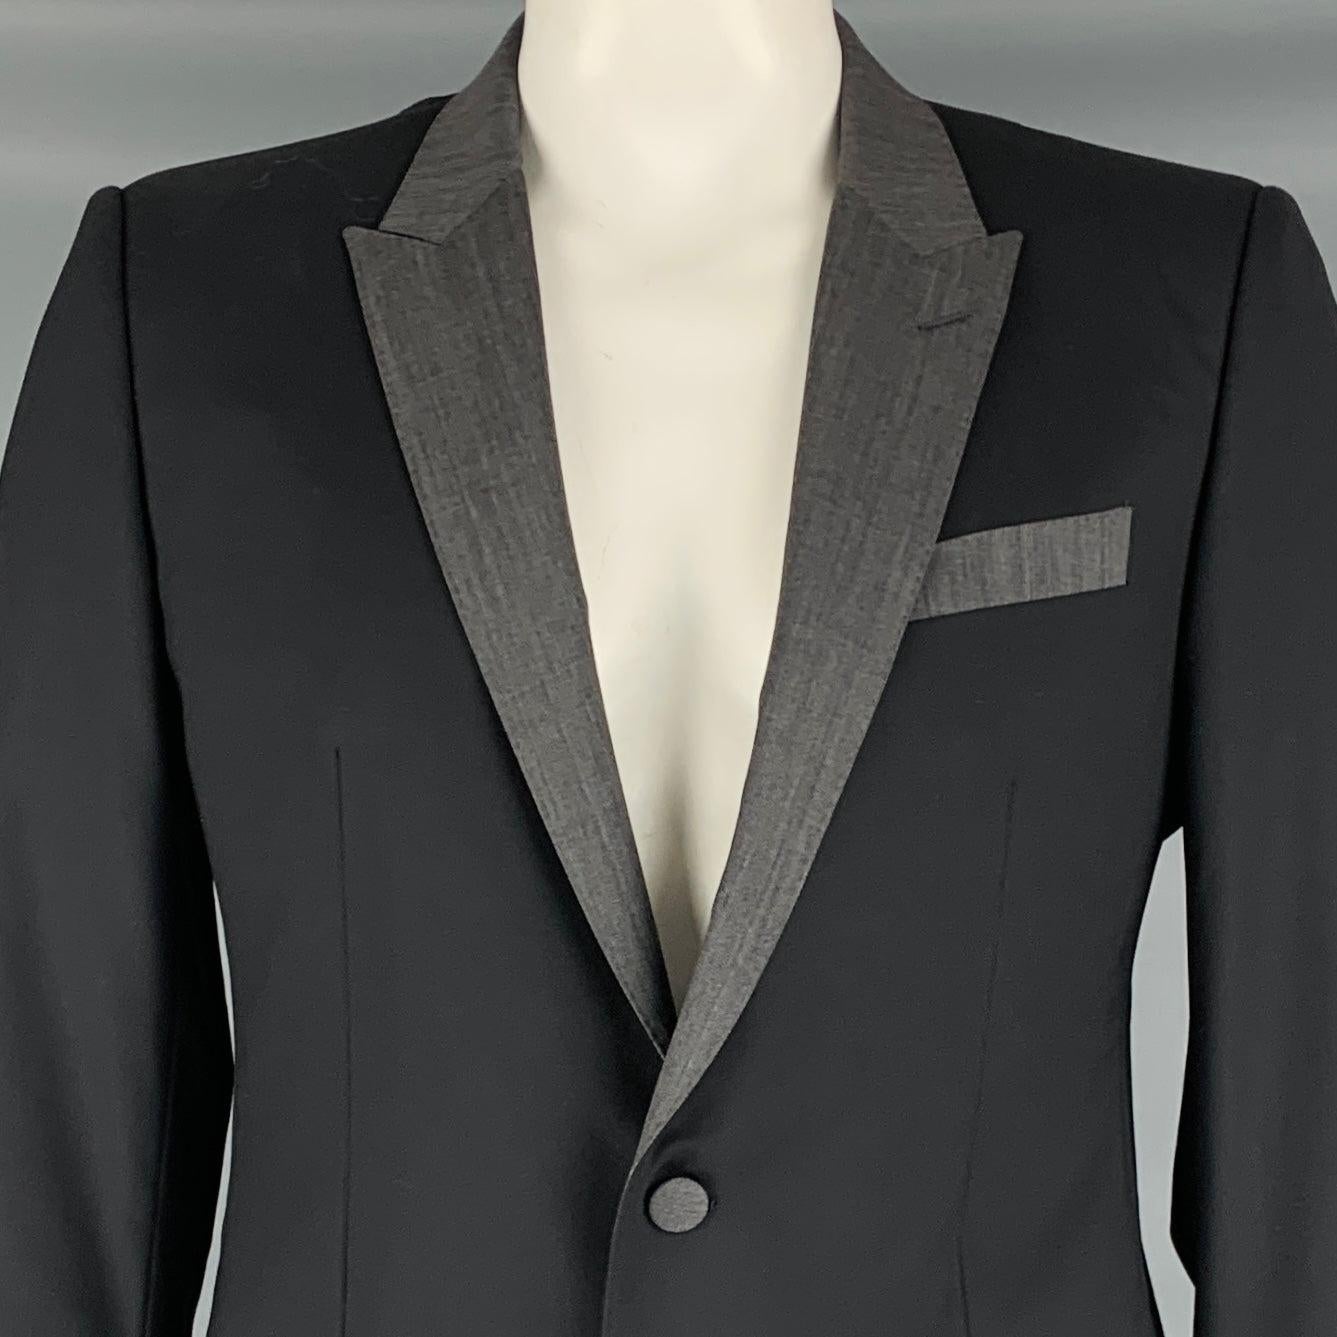 DOLCE & GABBANA sport coat
in a black and grey wool blend fabric featuring peak lapel, single vented back, and double button closure. Made in Italy.Very Good Pre-Owned Condition. Marks under arms. 

Marked:   IT 52 

Measurements: 
 
Shoulder: 17